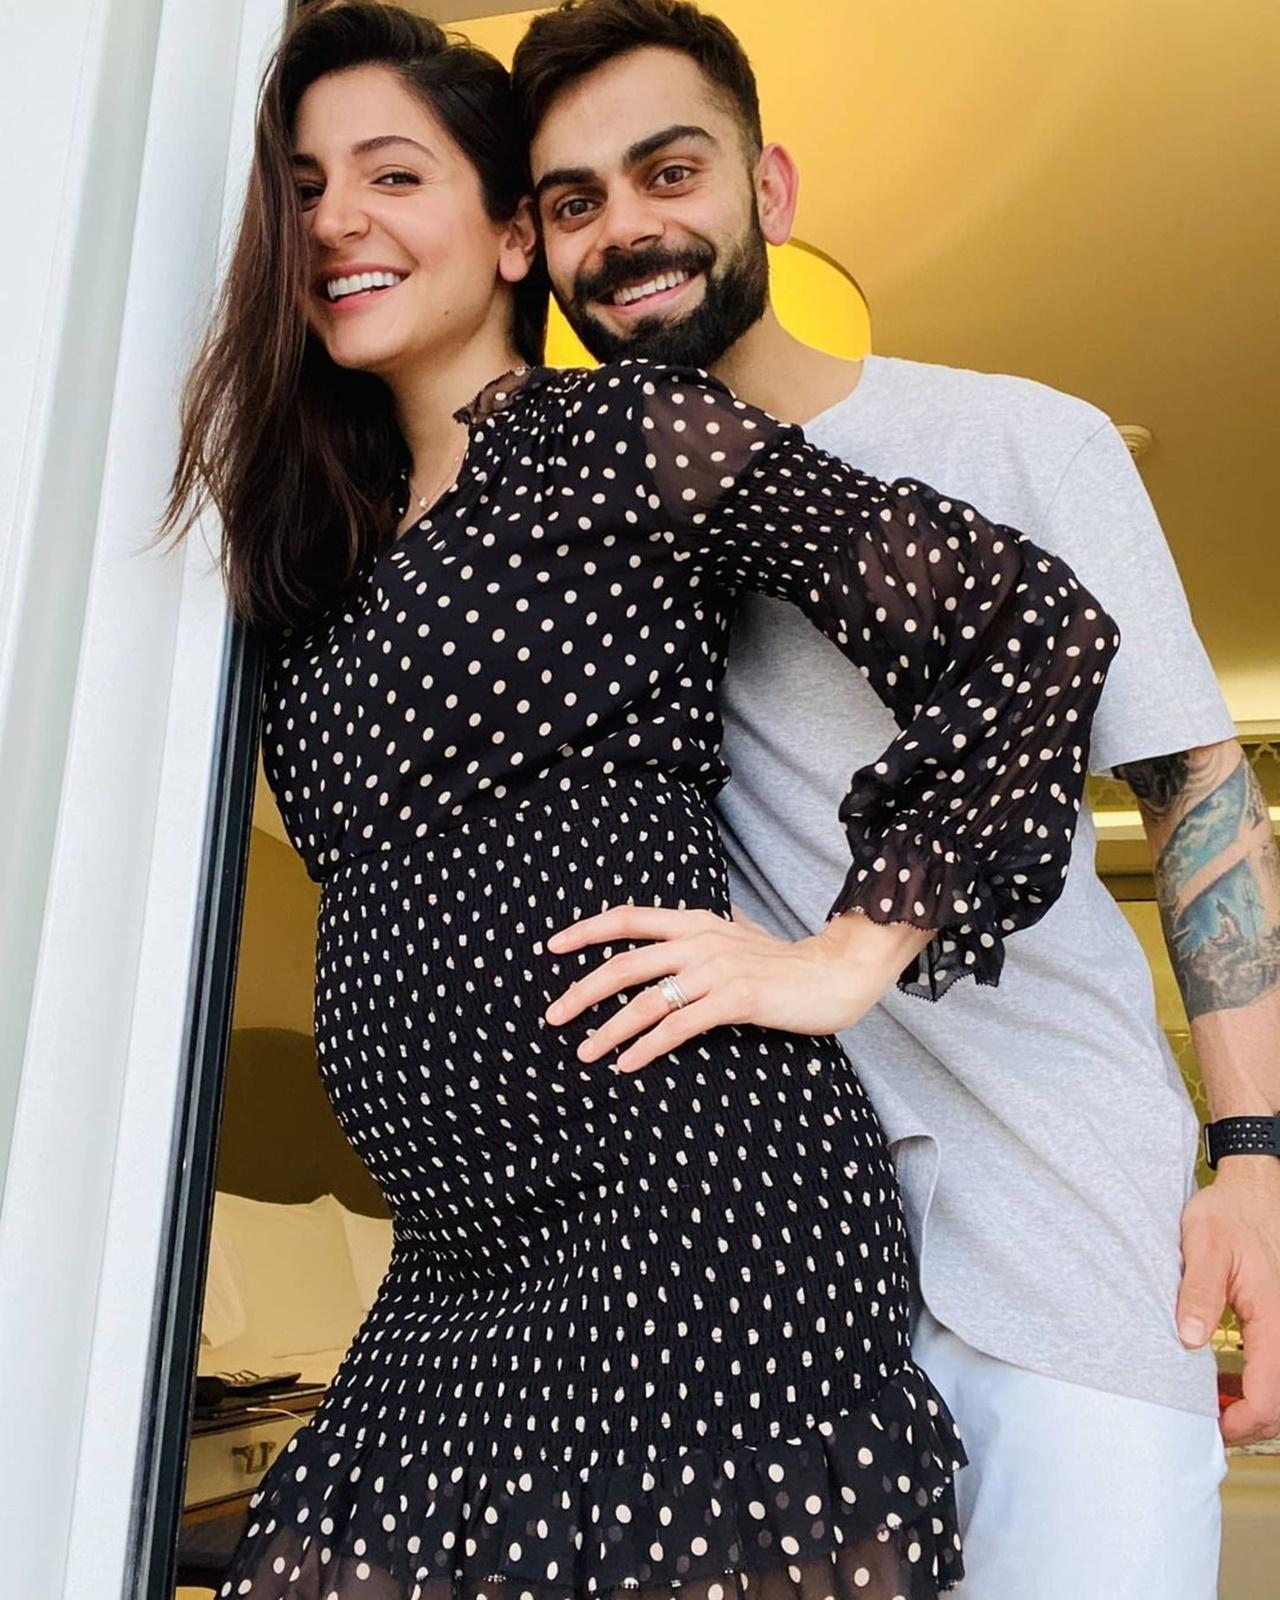 The couple who has maintained utmost privacy when it comes to their personal life broke the internet after announcing that they were pregnant in 2021